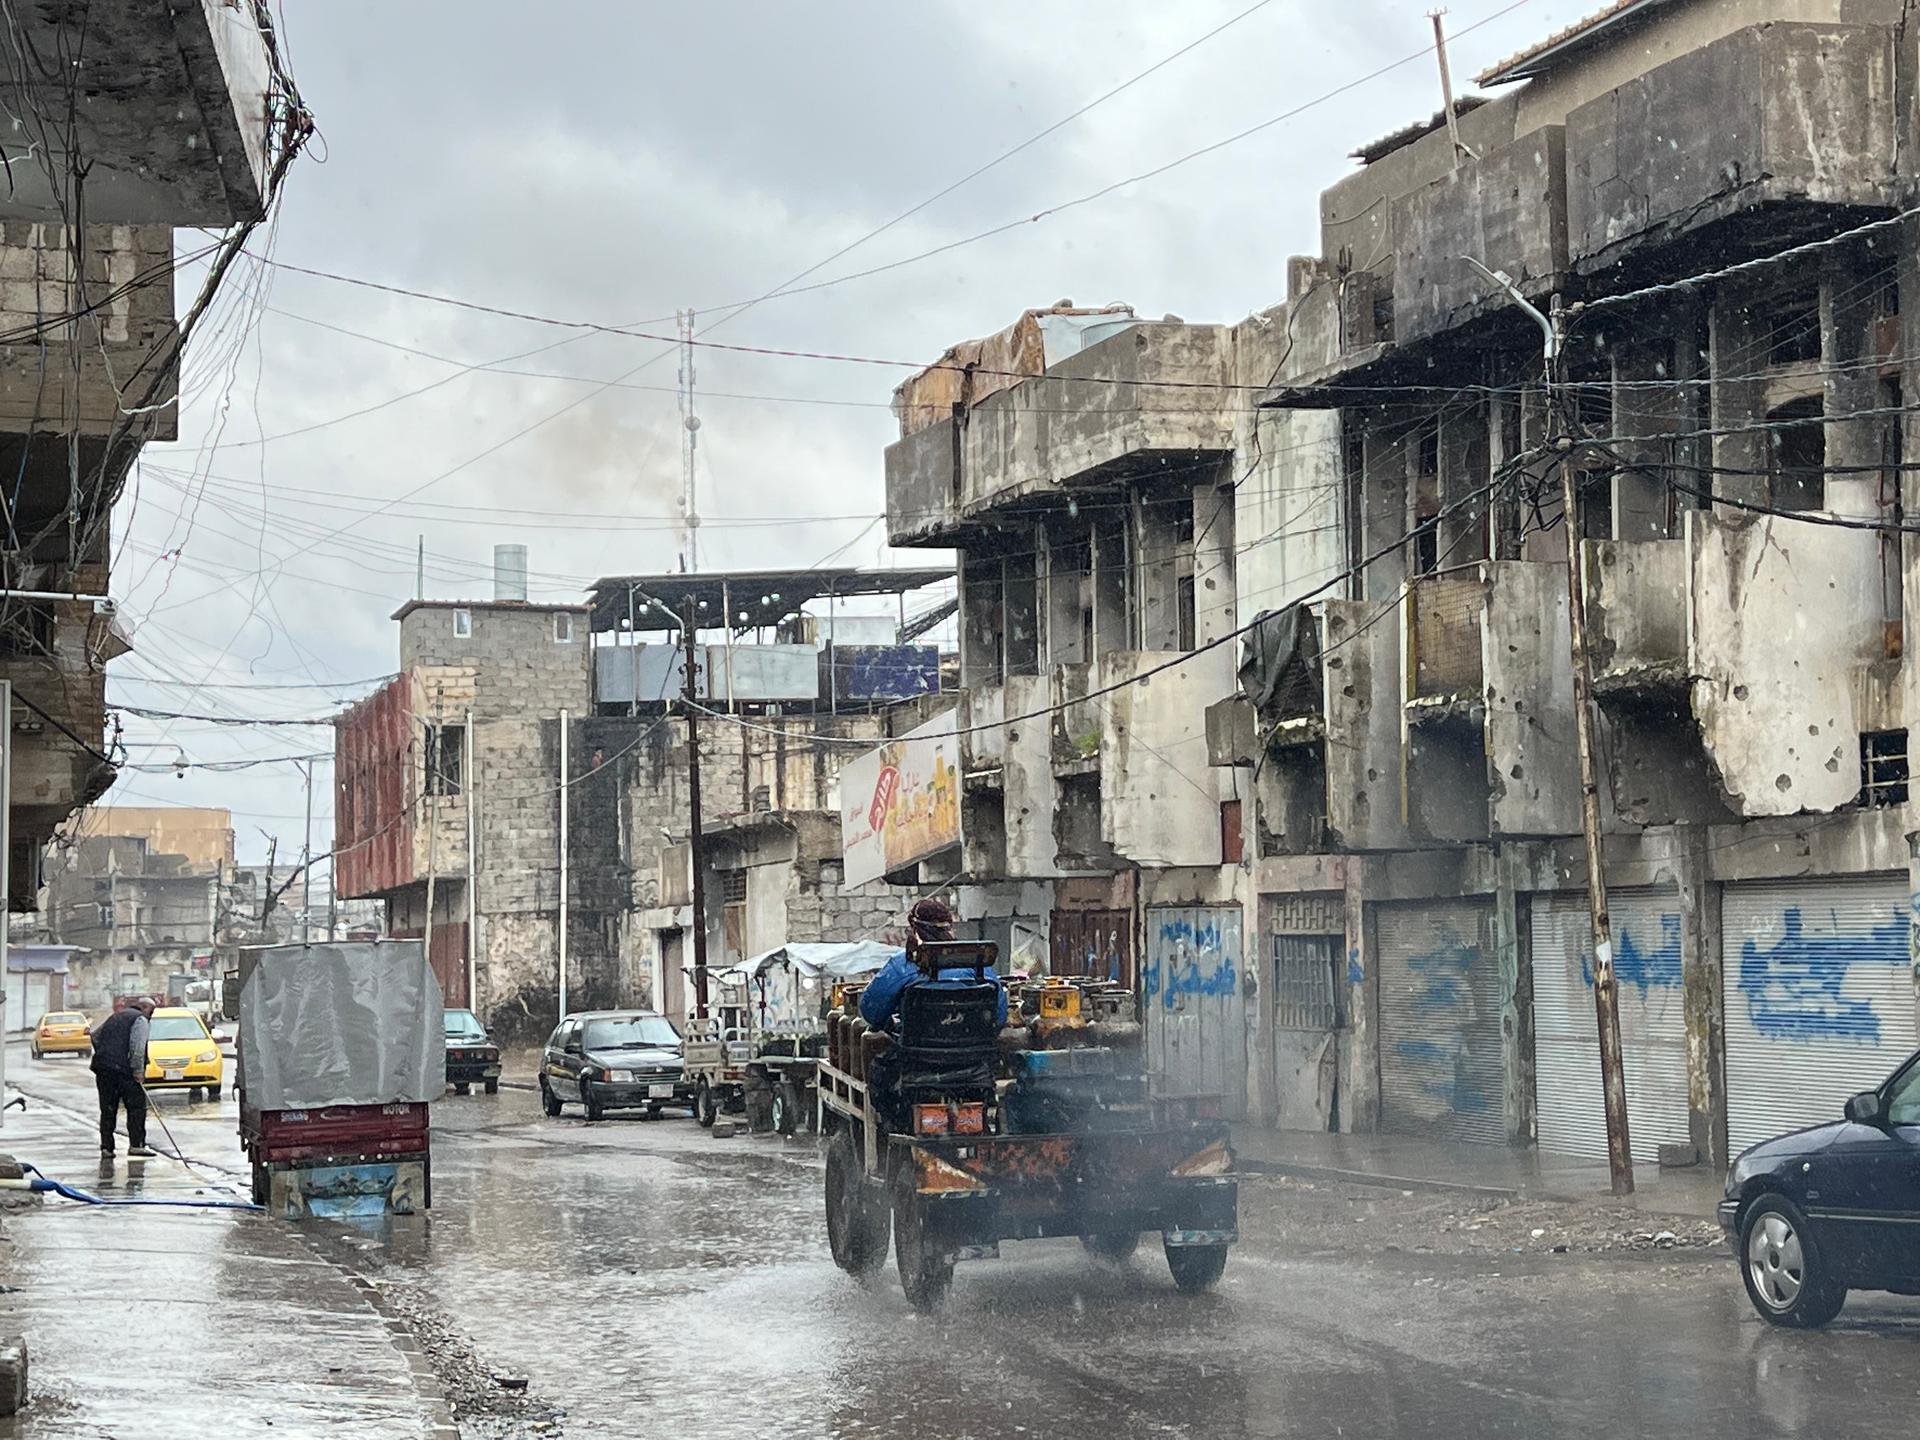 view of Mosul street